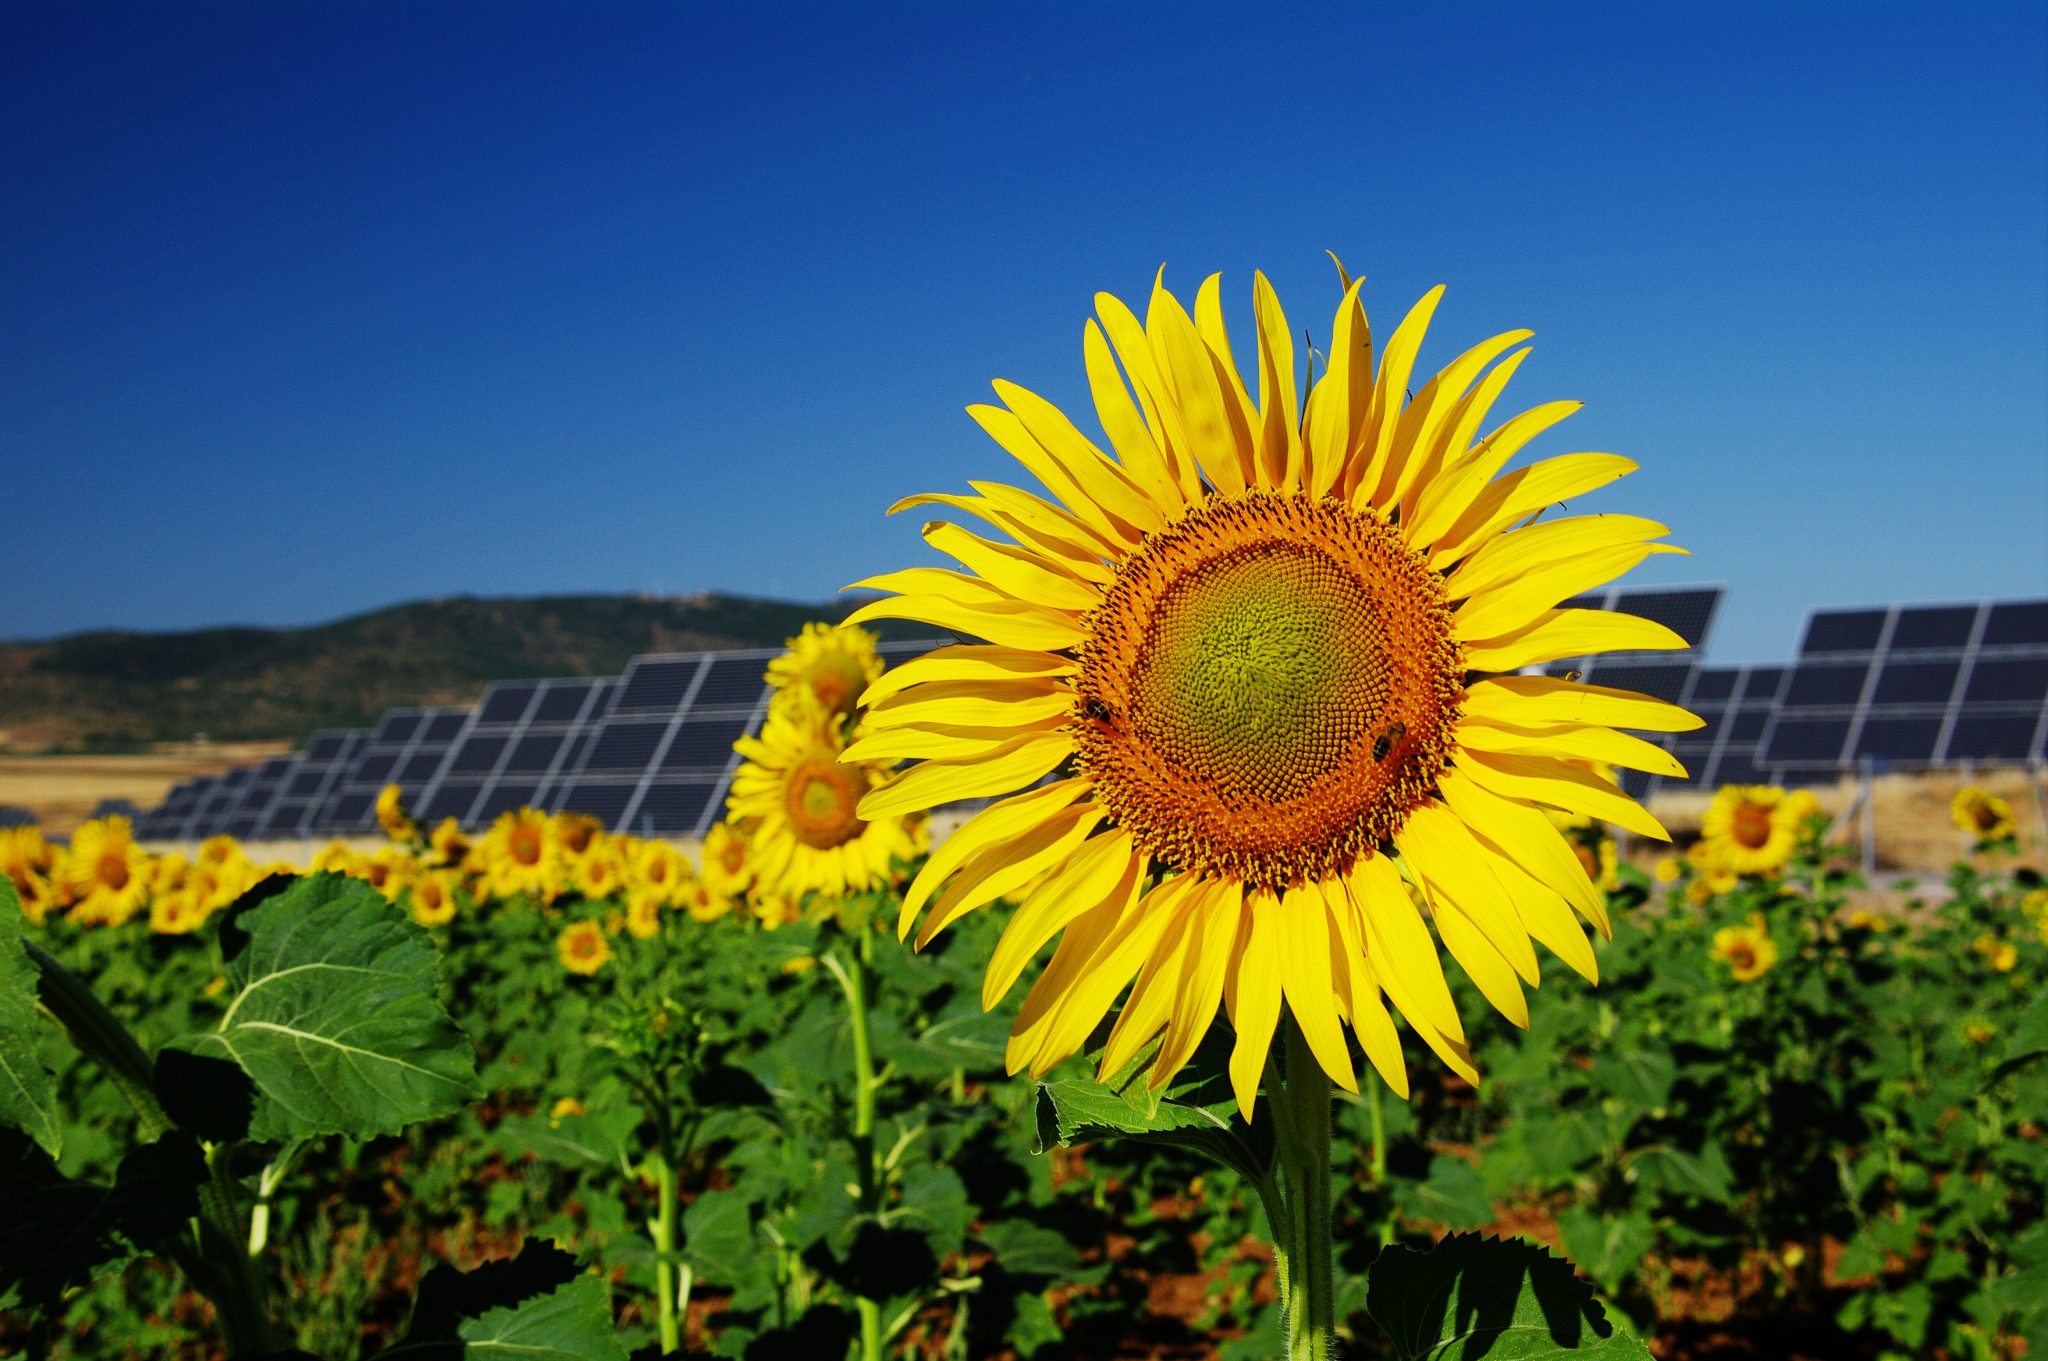 Sunflowers and solar panels tracking the sun